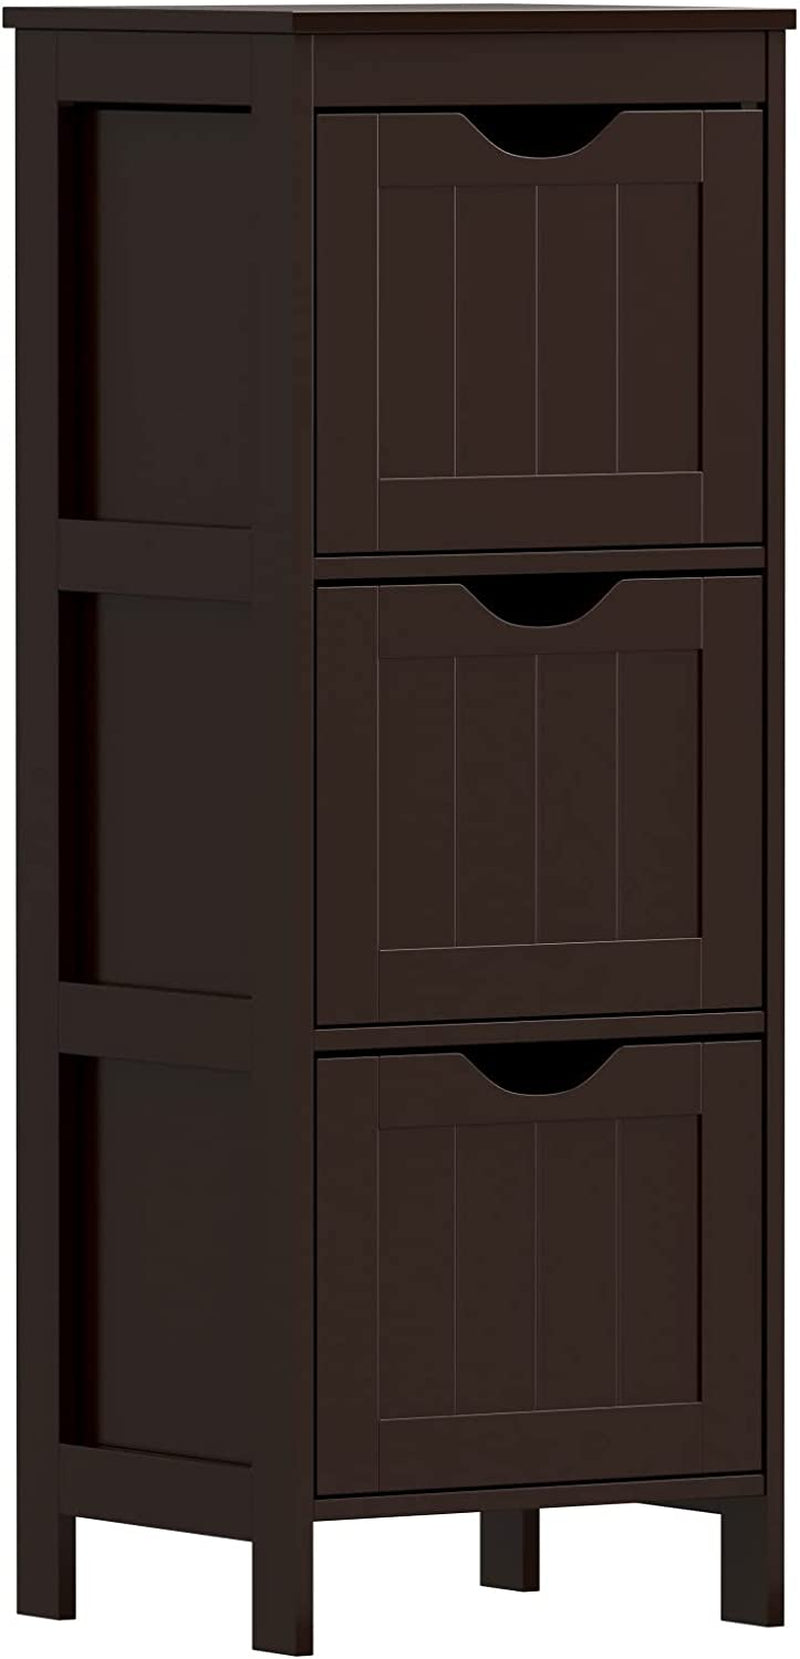 Reettic Narrow Bathroom Storage Cabinet with 3 Removable Drawers, DIY, Free Standing Side Storage Organizer for Bedroom, Living Room, Entryway, 11.8" L X 11.8" W X 35" H, Black BYSG102B Home & Garden > Household Supplies > Storage & Organization Reettic Brown 11.8"L x 11.8"W x 35"H 